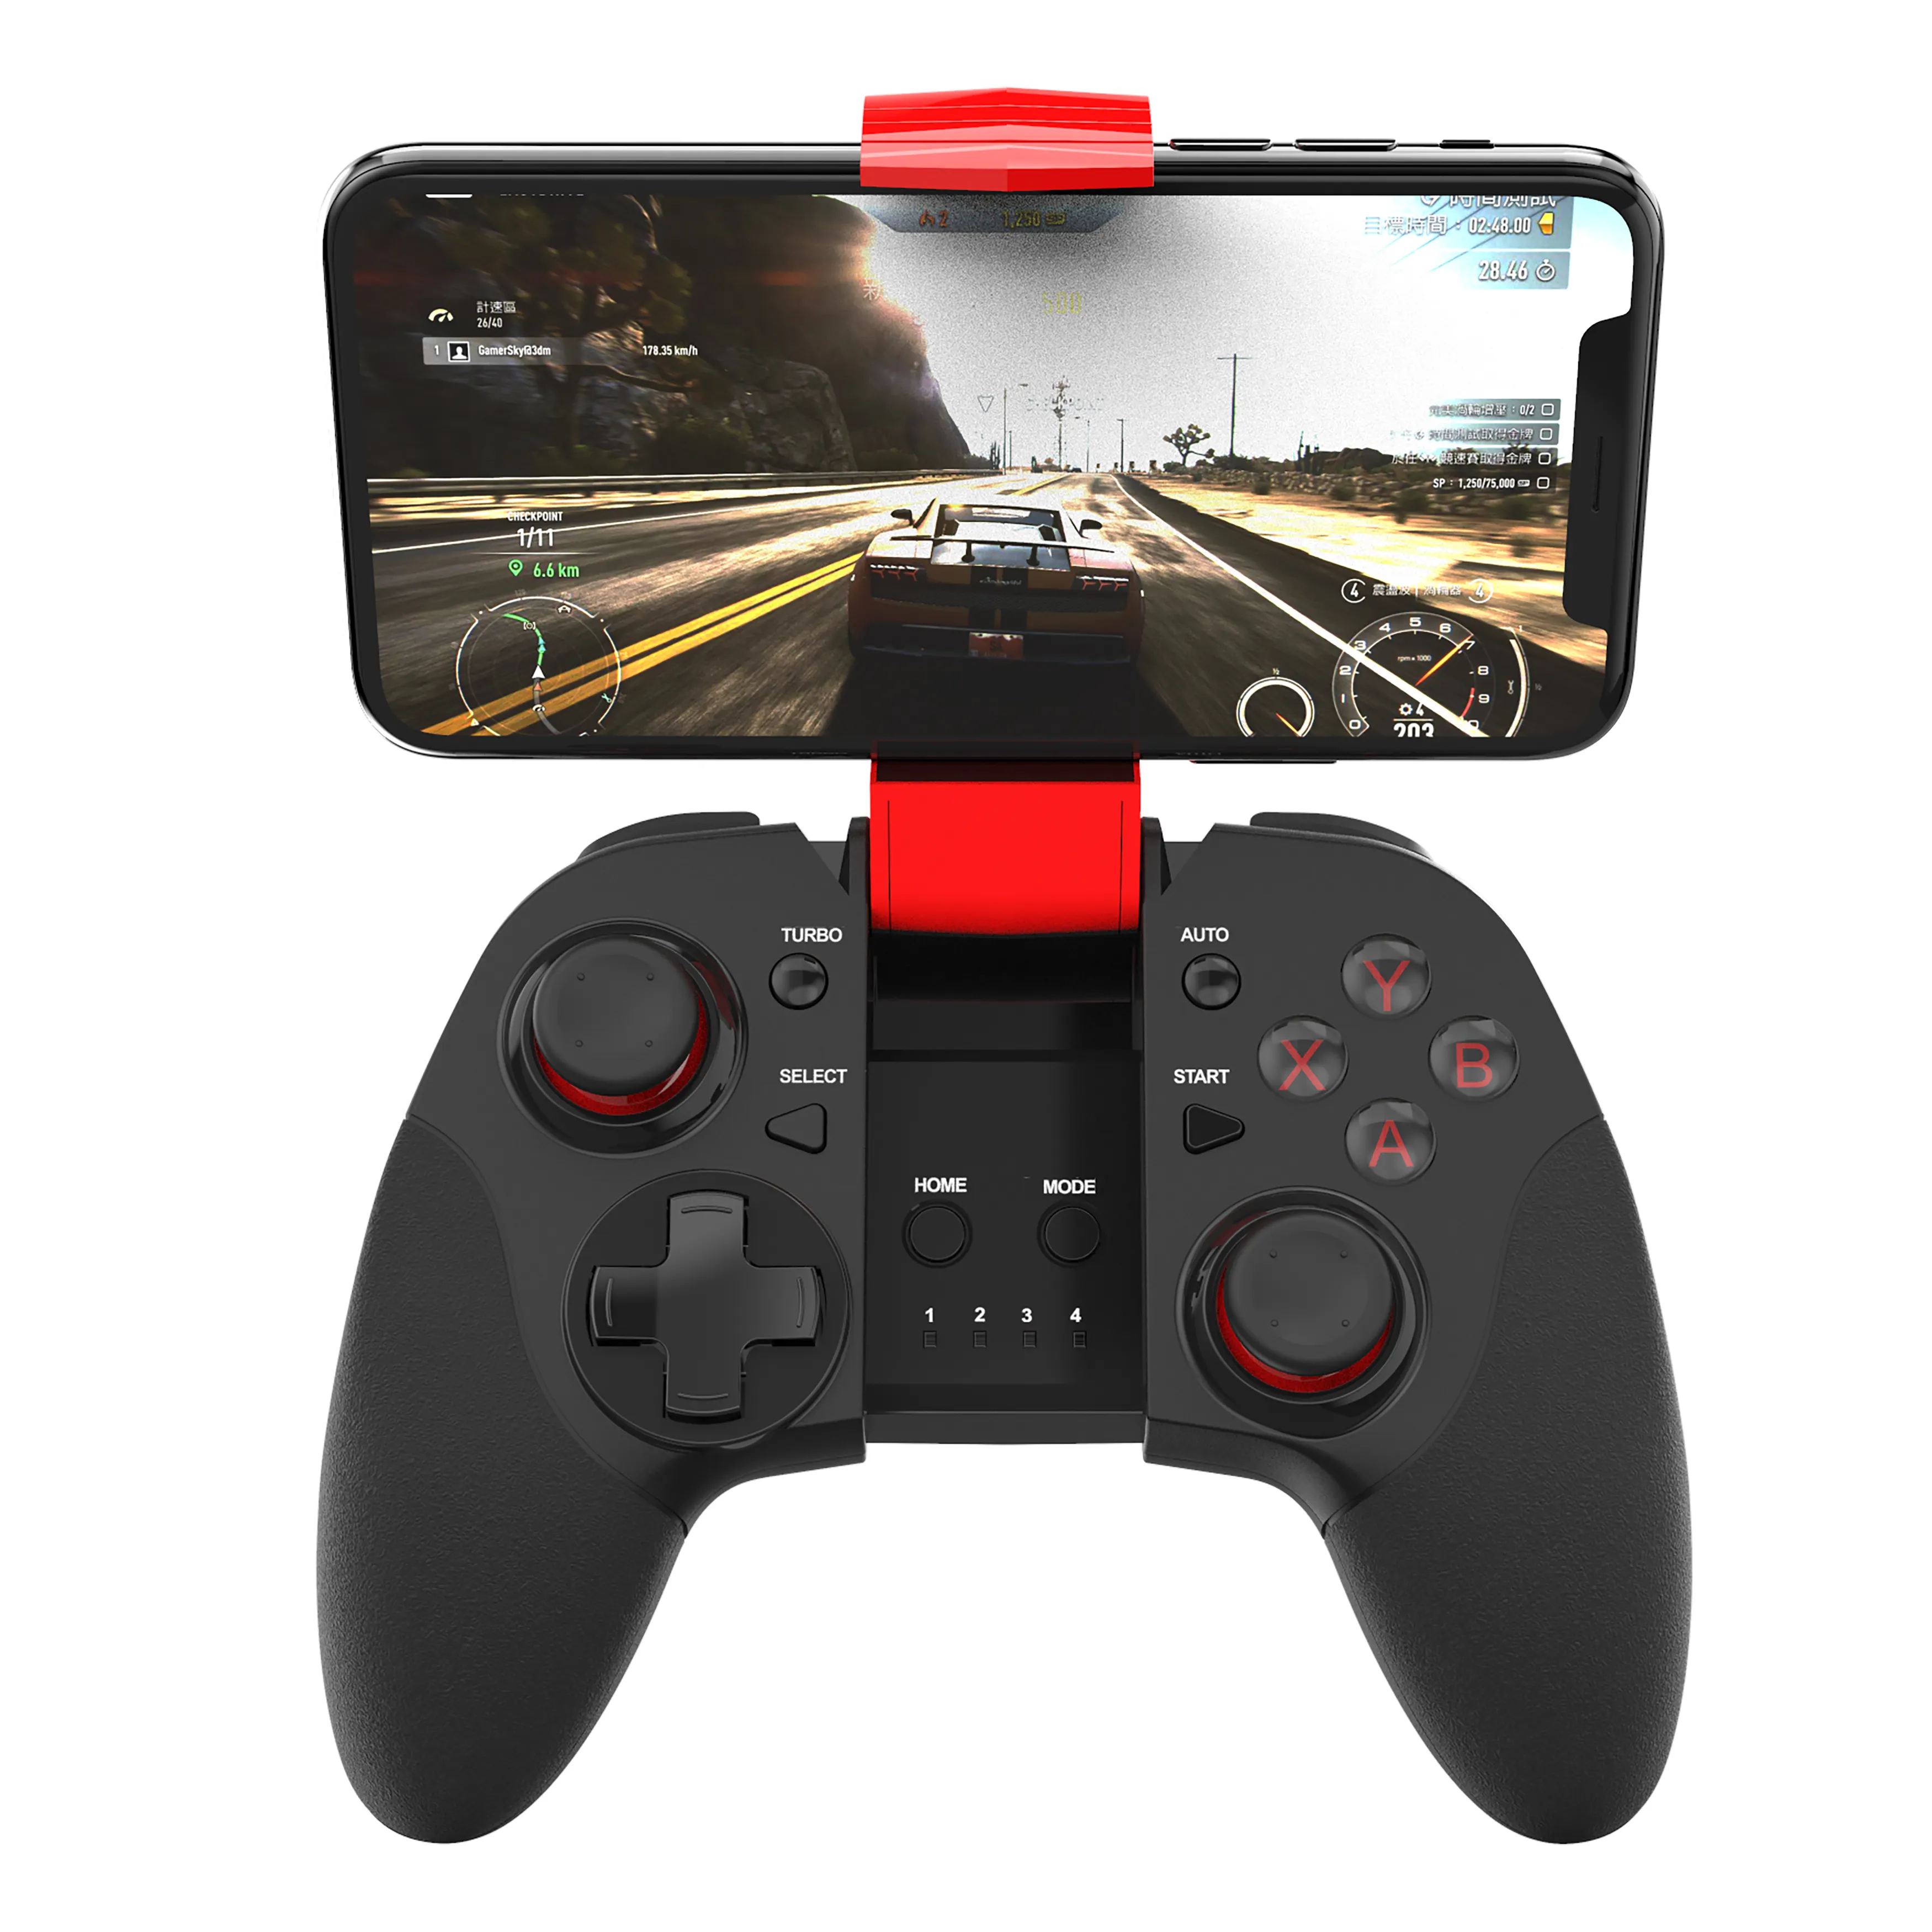 Whole Sell Wireless Dual Vibration Android Gamepad für Nintendo Switch PC-XBOX360 PS3 Mobile Game Controller